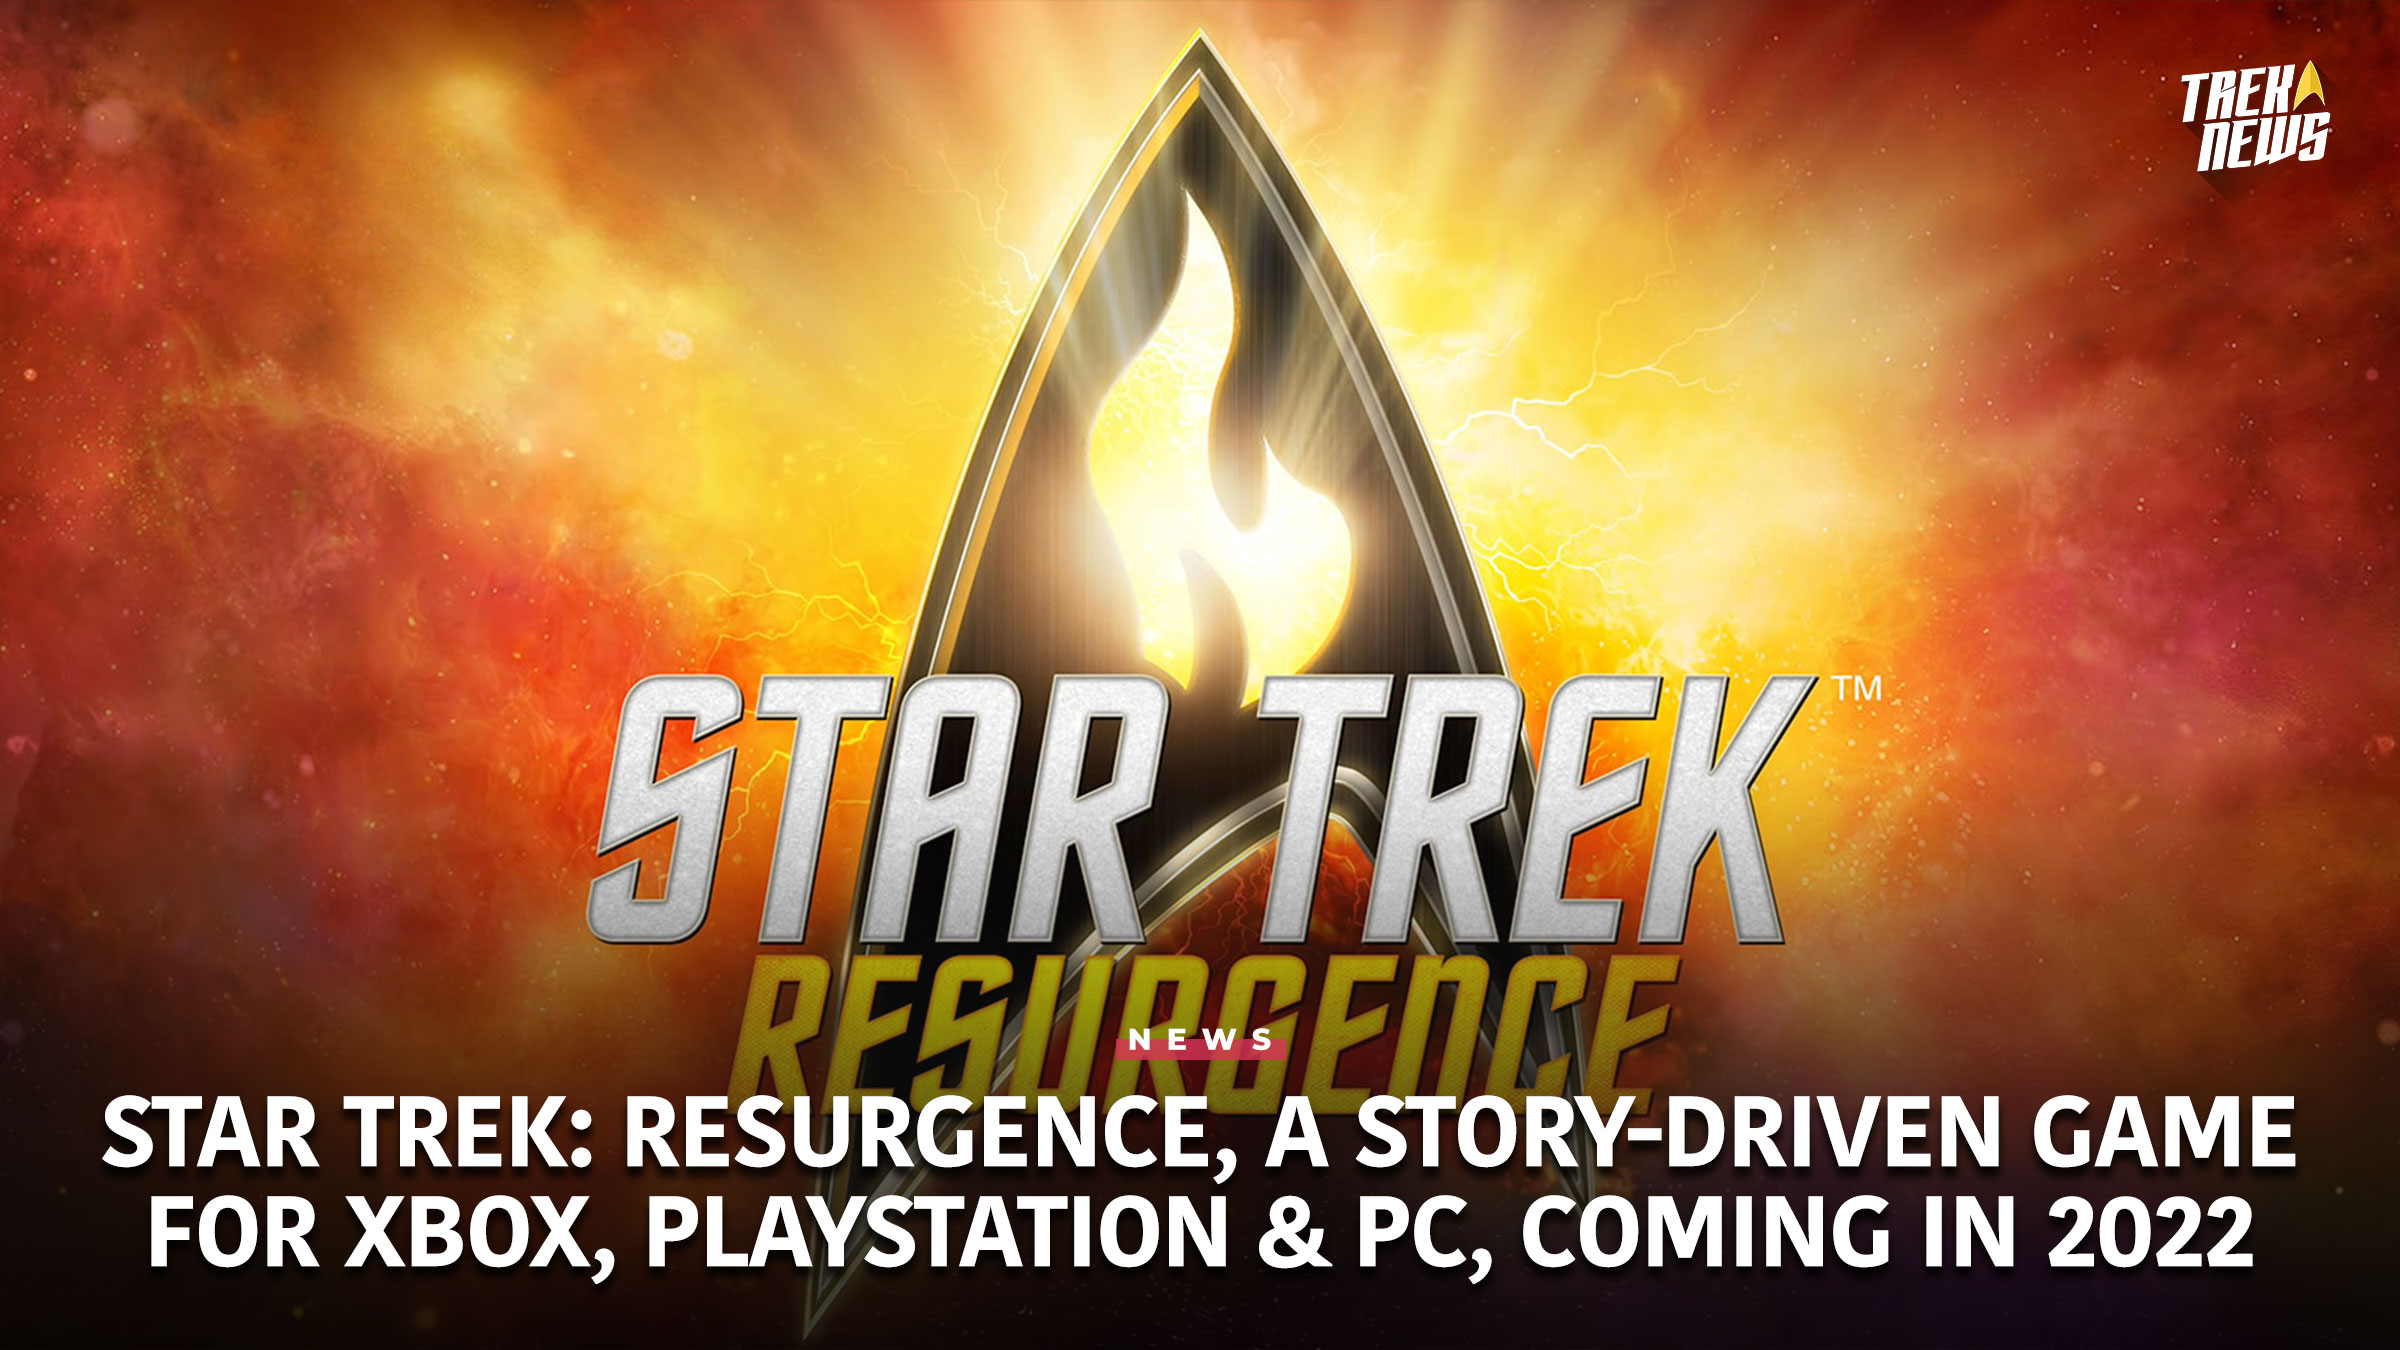 Star Trek: Resurgence, A Story-Driven Game For Xbox, PlayStation & PC, Coming In 2022